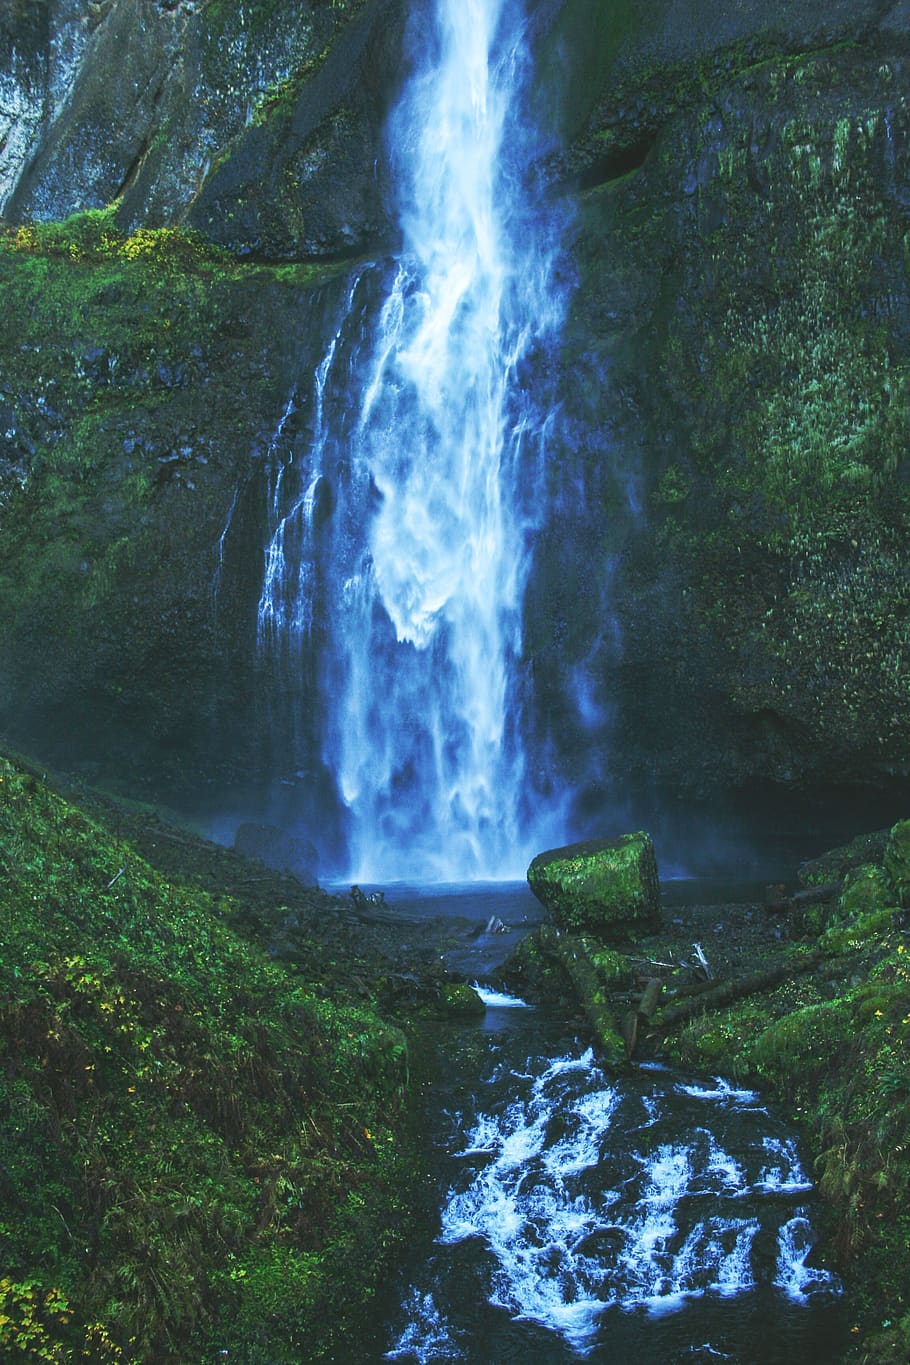 landscape, nature, oregon, outdoor, waterfall, multnomah falls, scenic, forest, water, woods